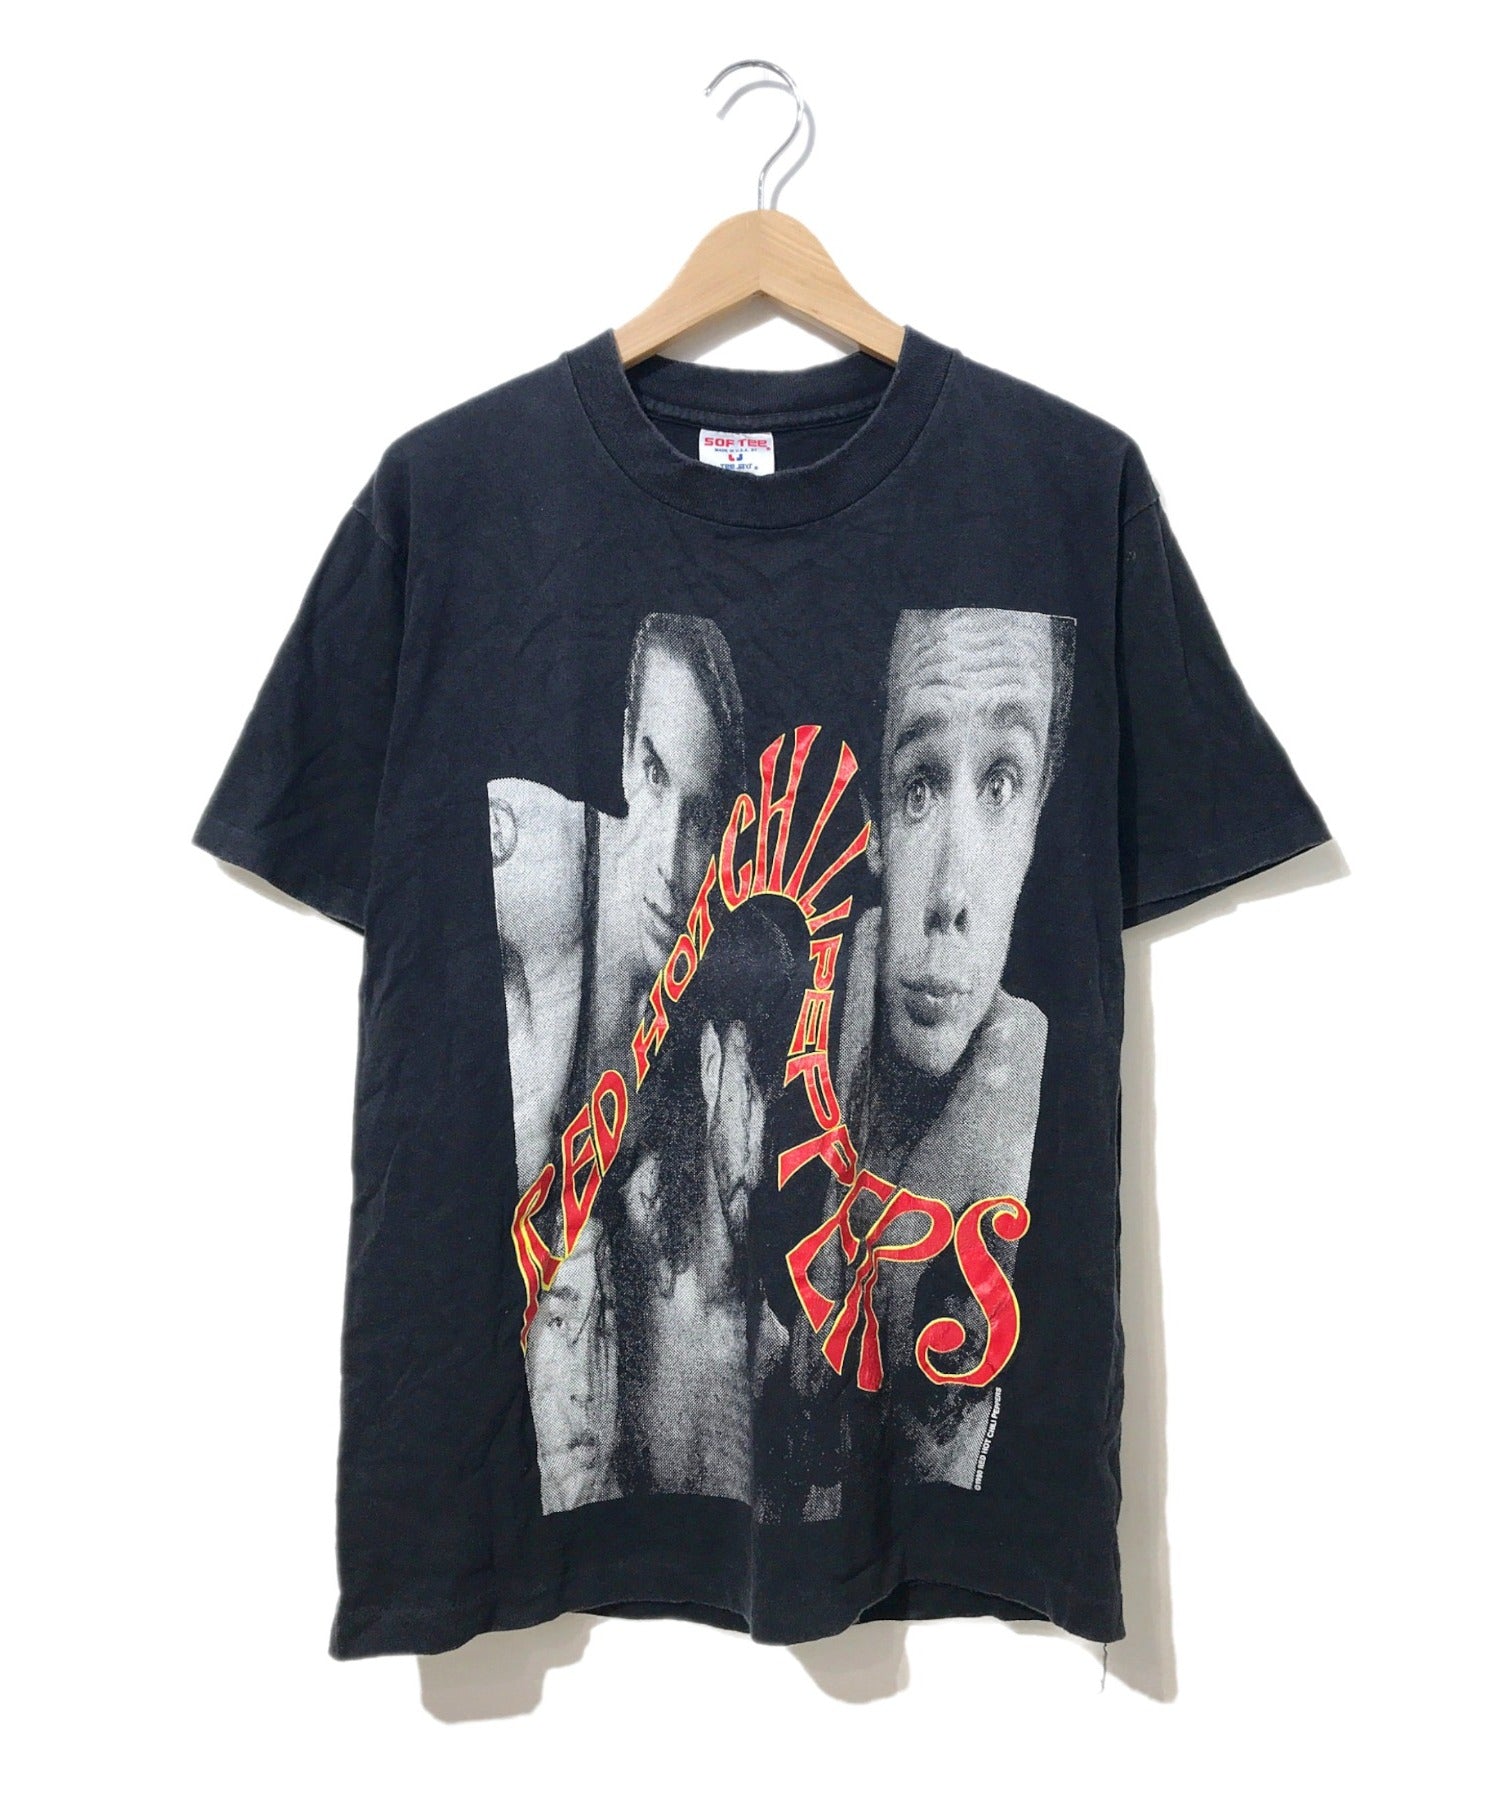 [Vintage Clothes] 90's Red Hot Chili Peppers Band T-Shirt